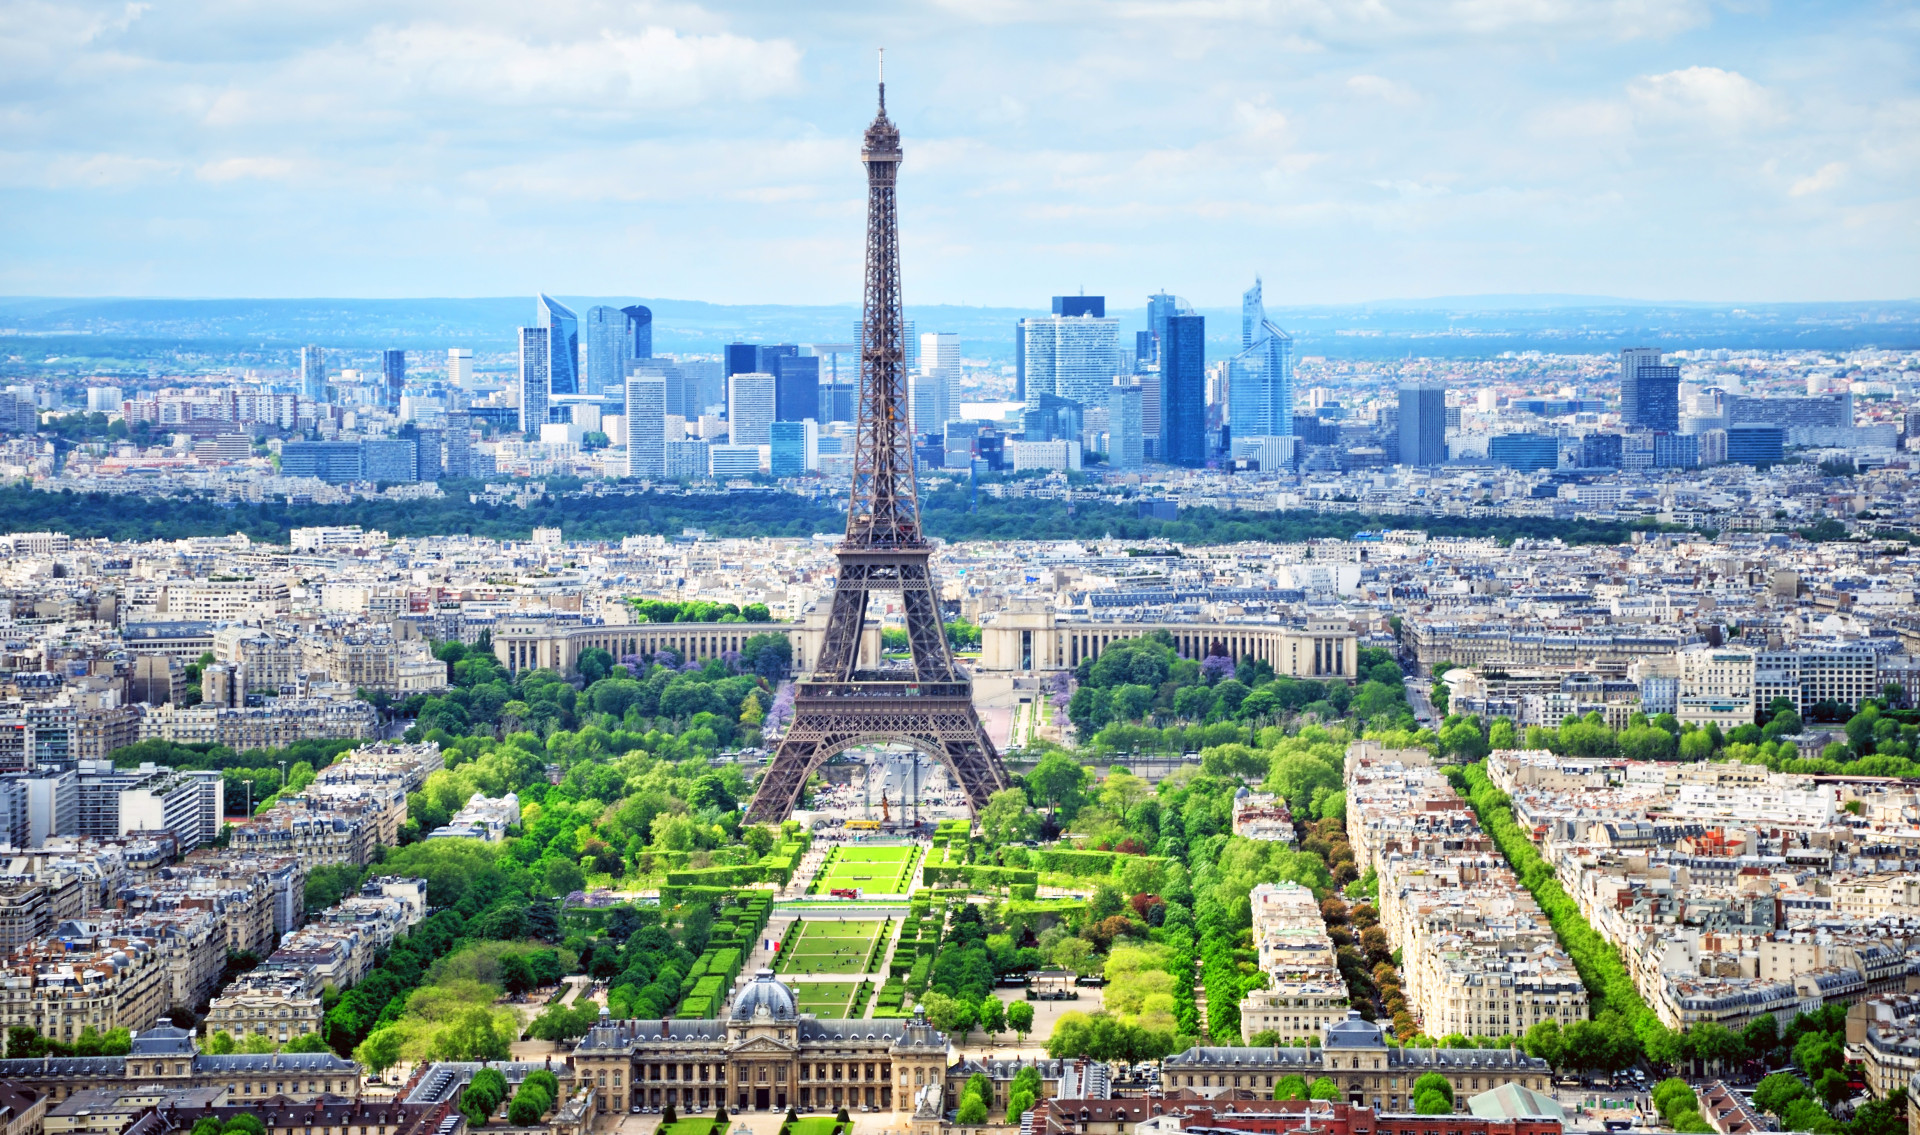 The French capital is known for its glamorous atmosphere and imposing monuments such as the Eiffel Tower.